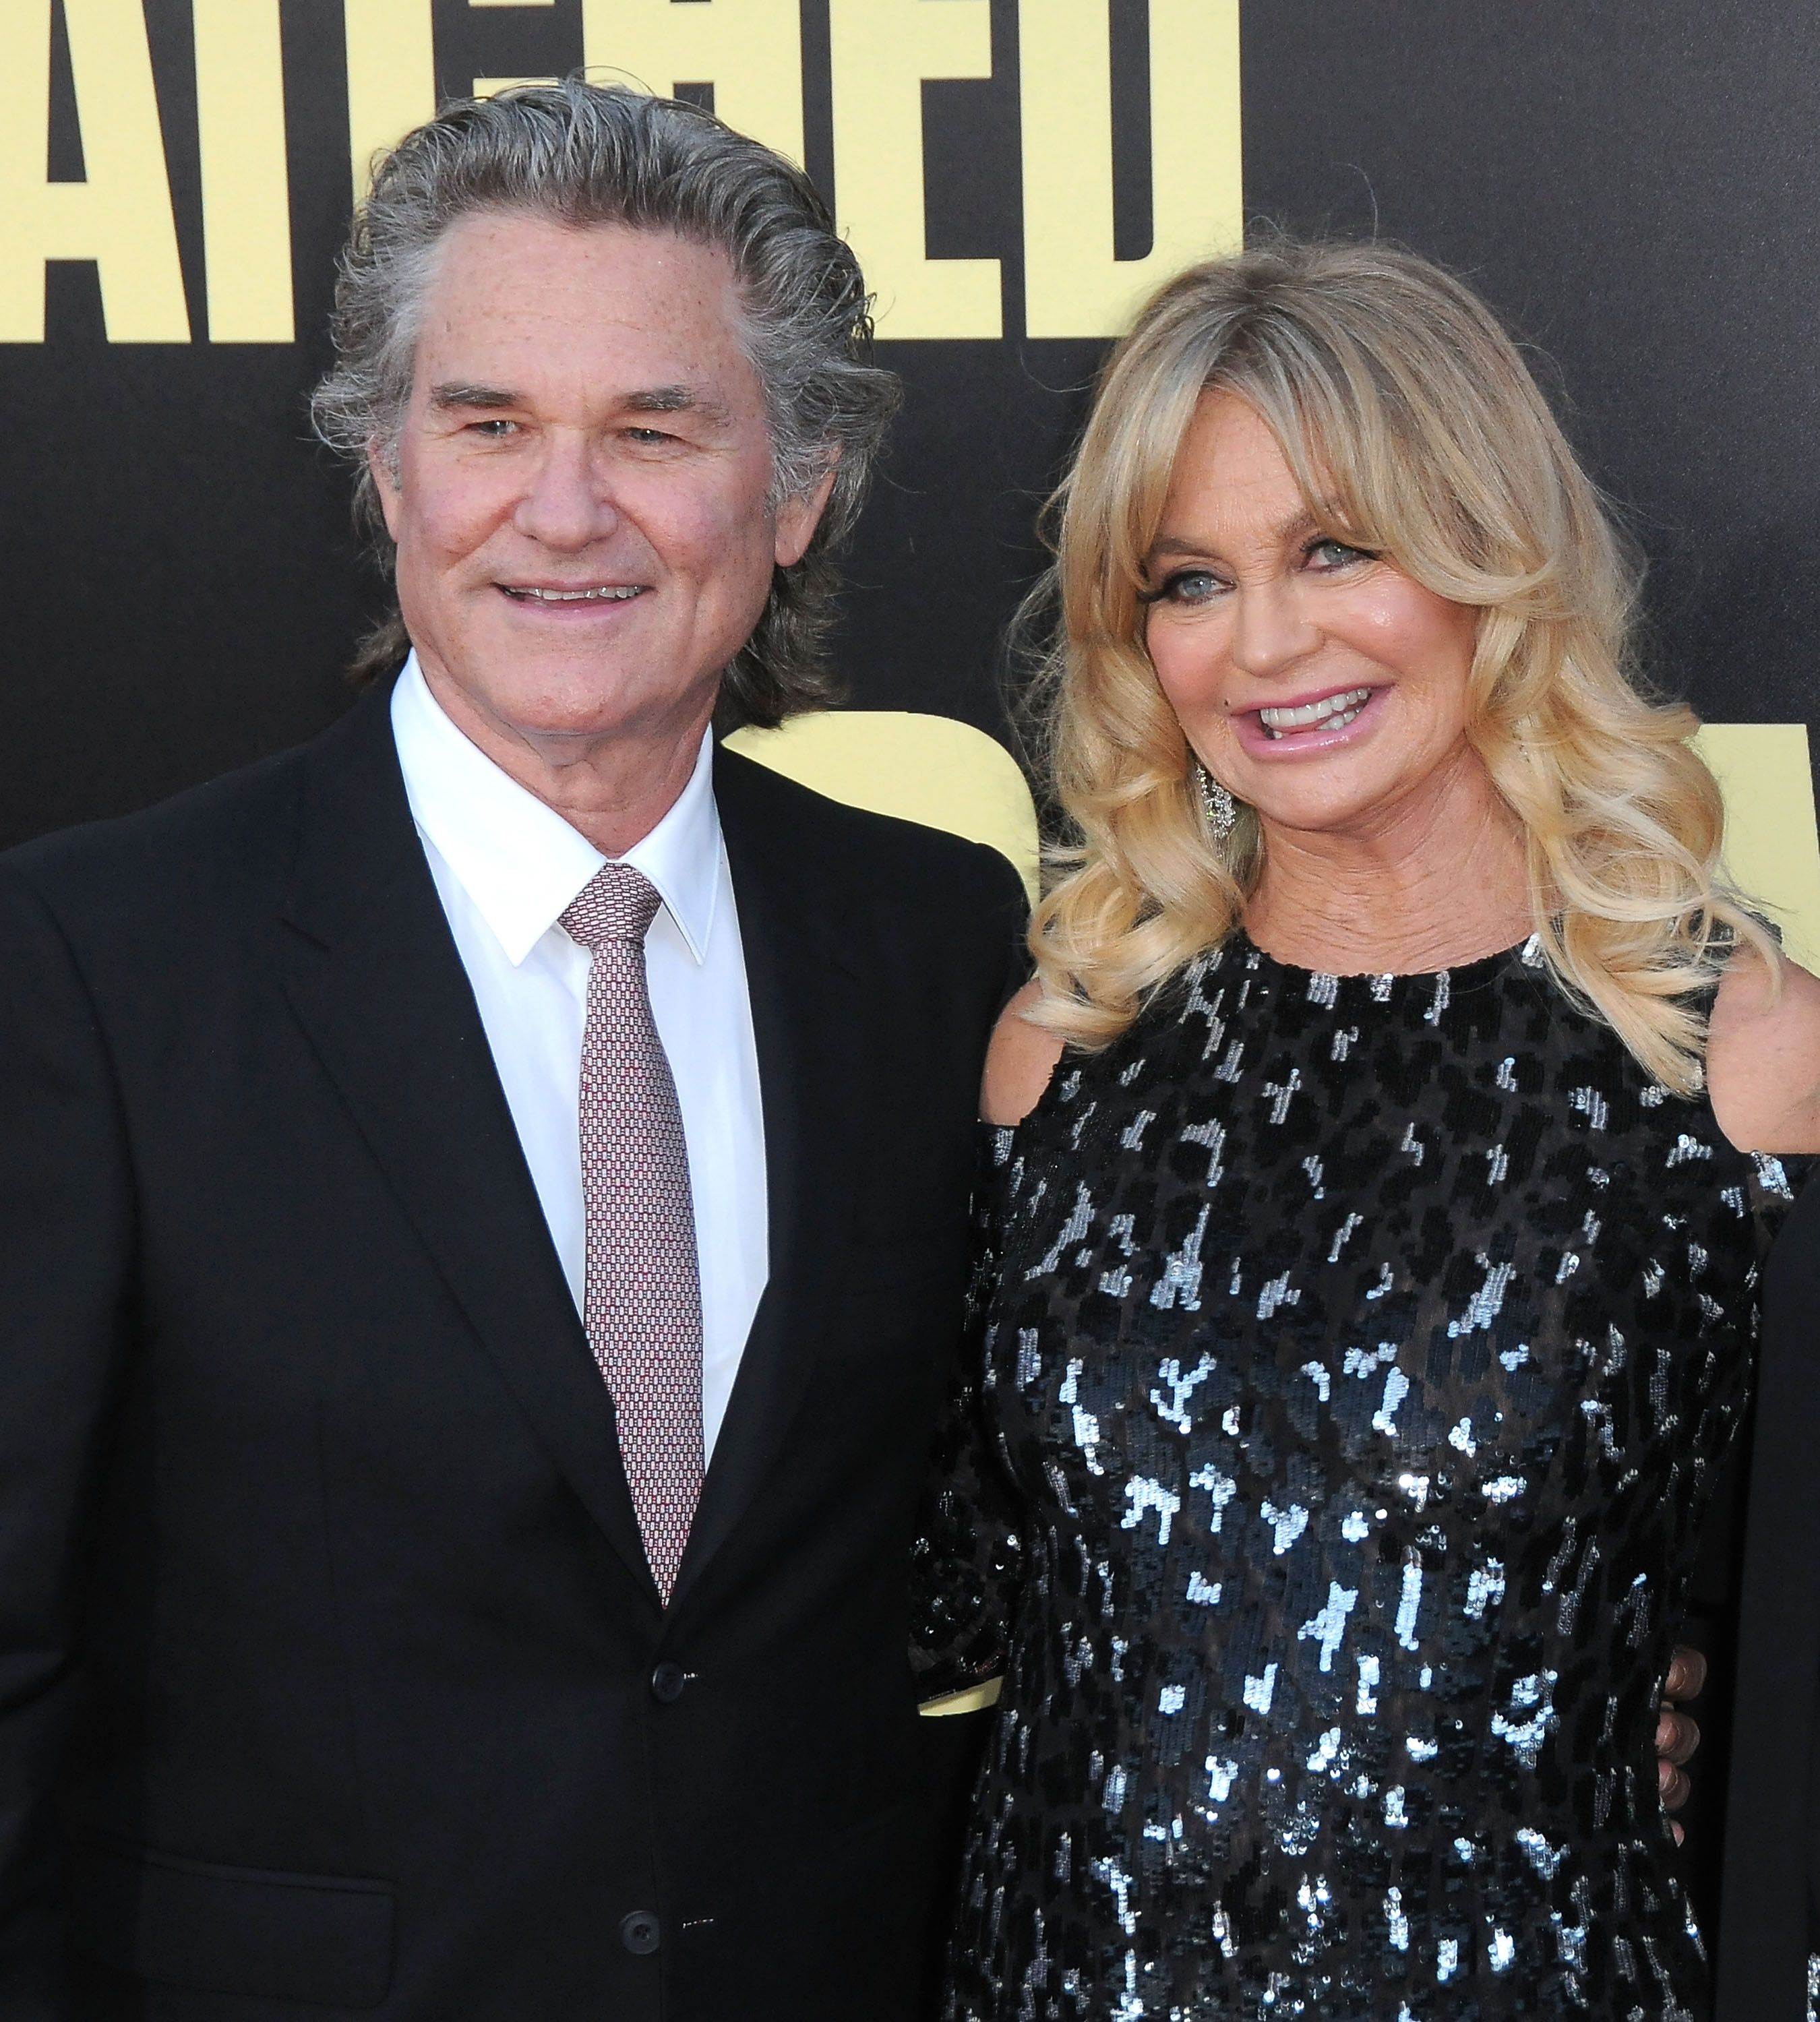 Kurt Russell and Goldie Hawn at the premiere of 'Snatched'  on May 10, 2017 | Photo: Getty Images